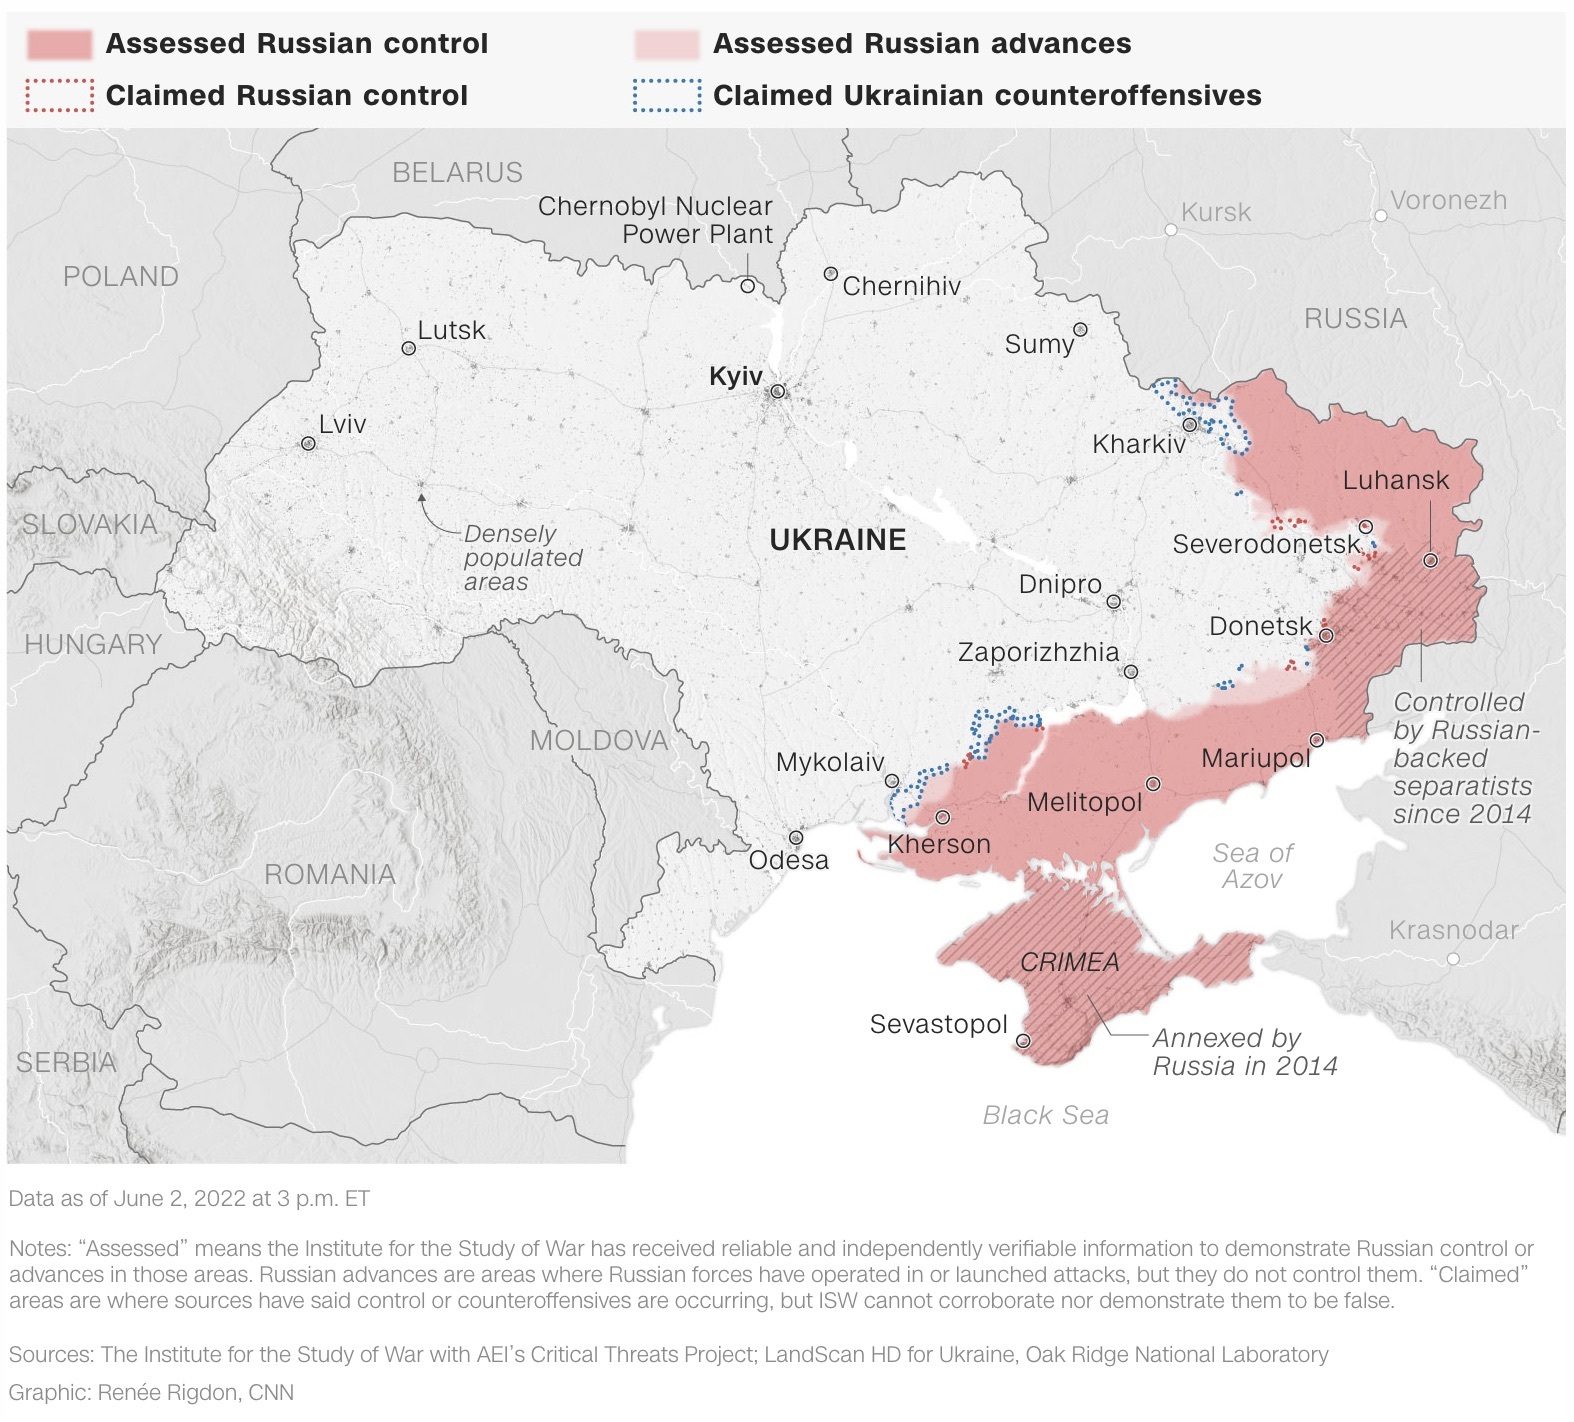 Ukrainian official says Russian general given until June 10 to capture Severodonetsk or key highway